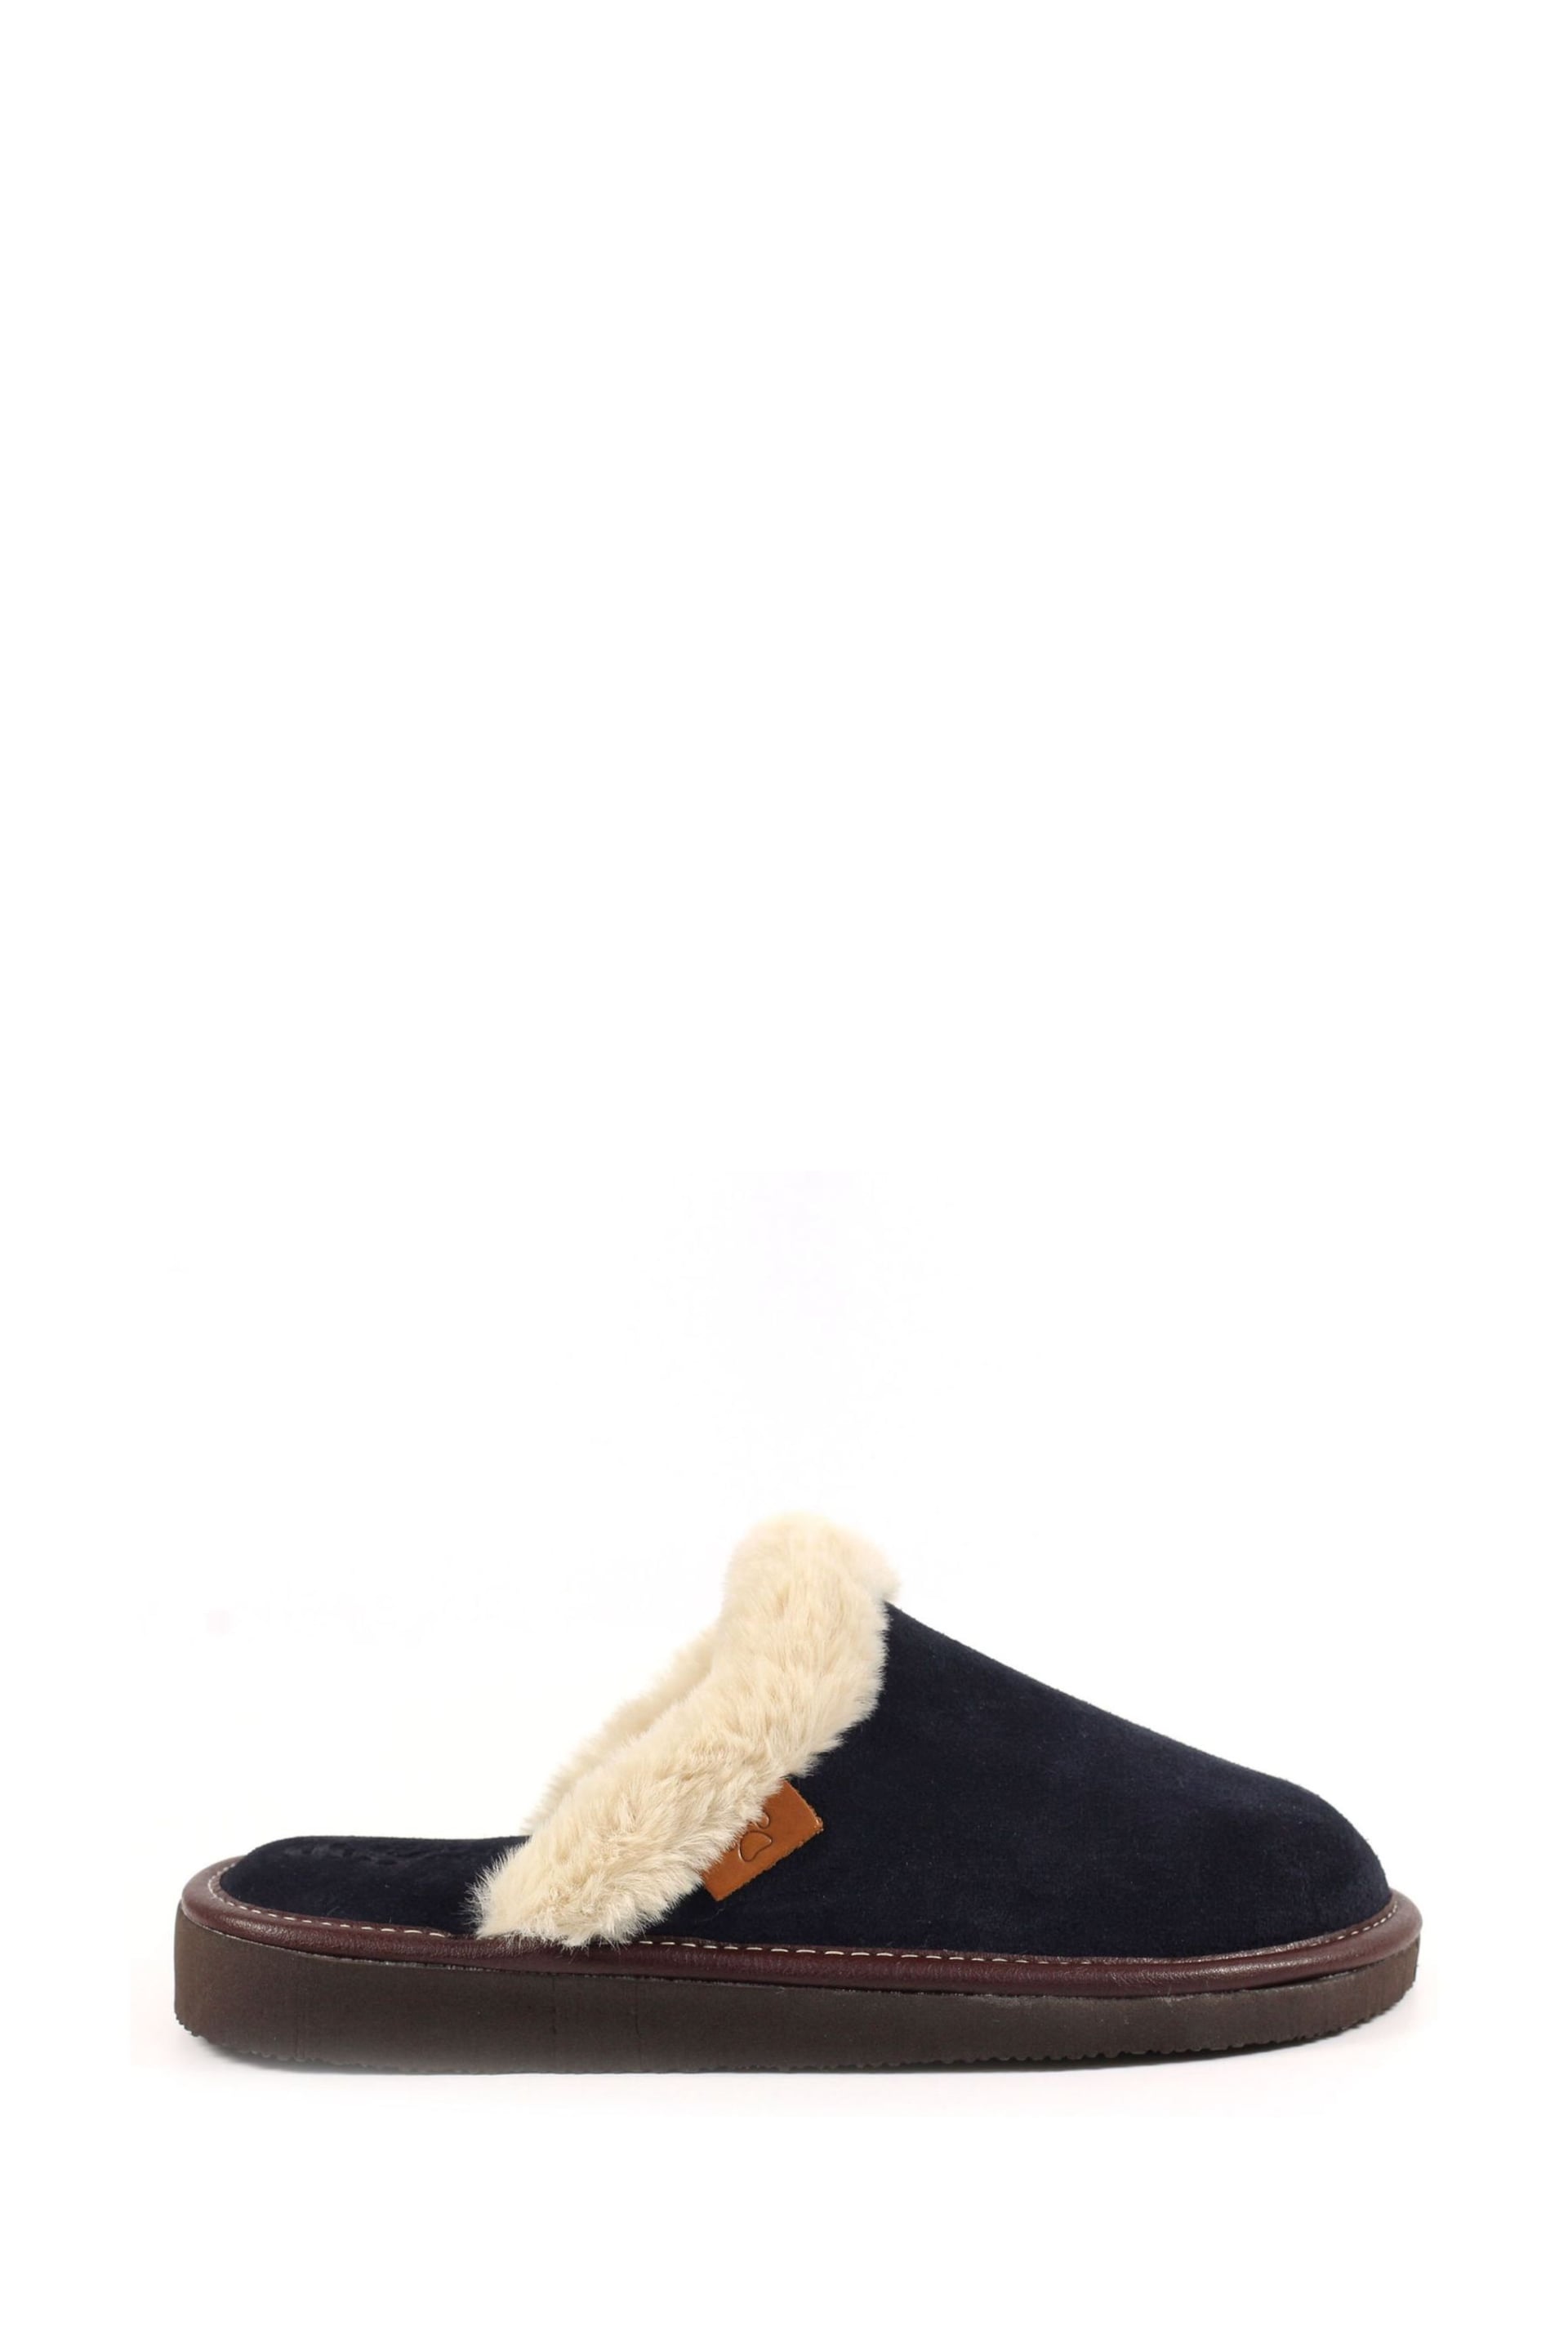 Lunar Lazy Dogz Otto Suede Mule Slippers - Image 1 of 10